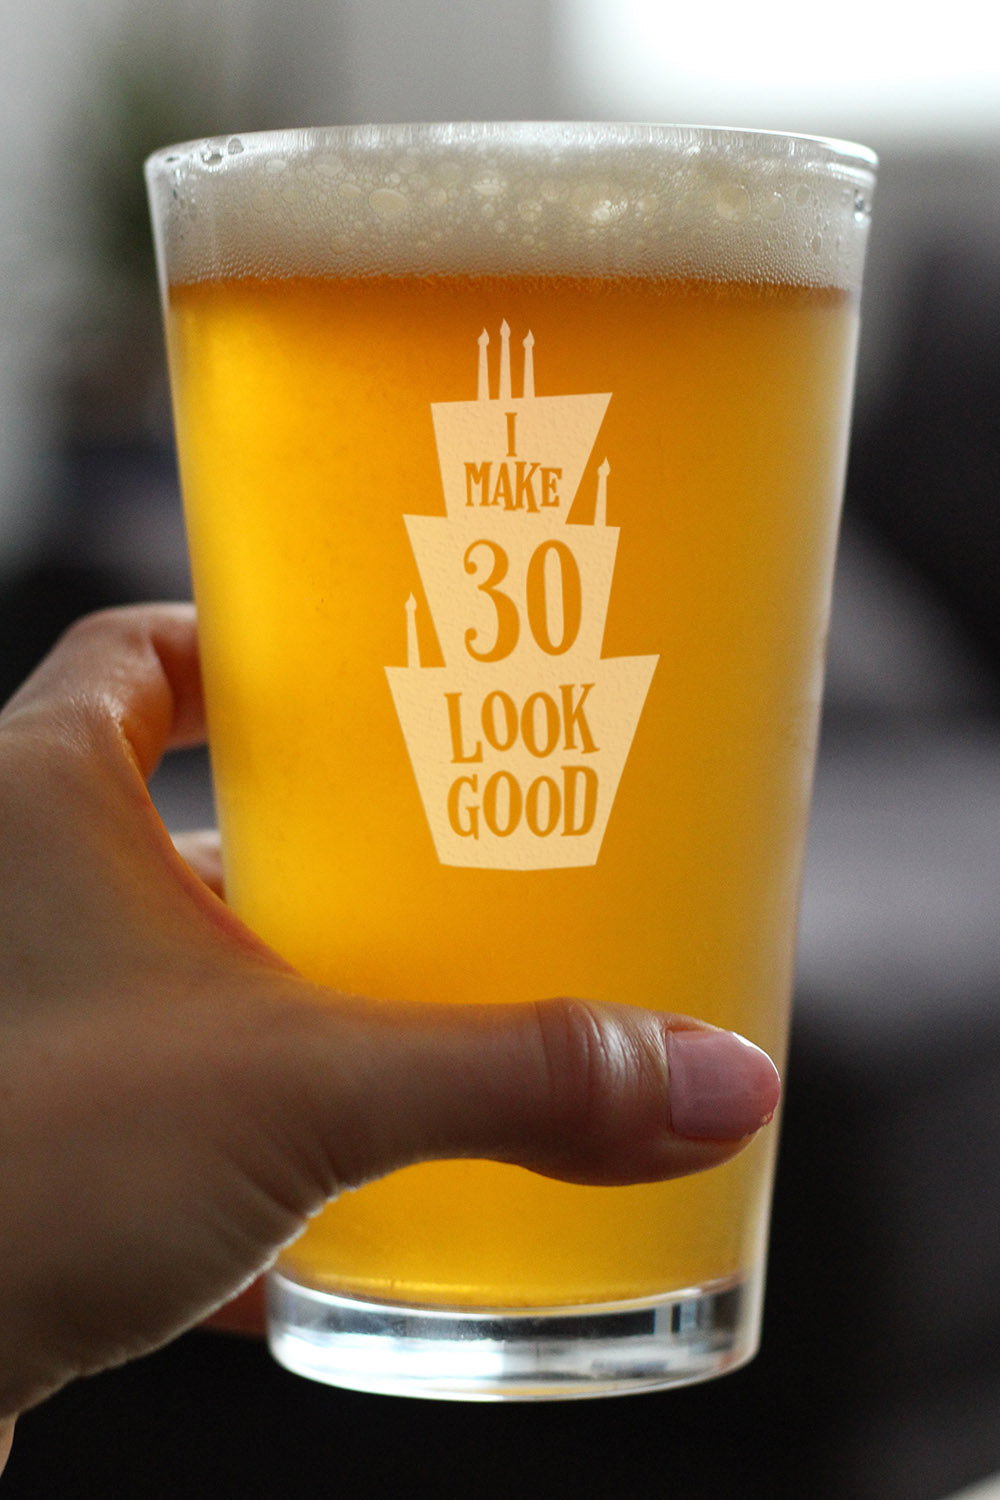 Make 30 Look Good - Funny 16 oz Pint Glass for Beer - 30th Birthday Gifts for Men or Women Turning 30 - Bday Party Decor